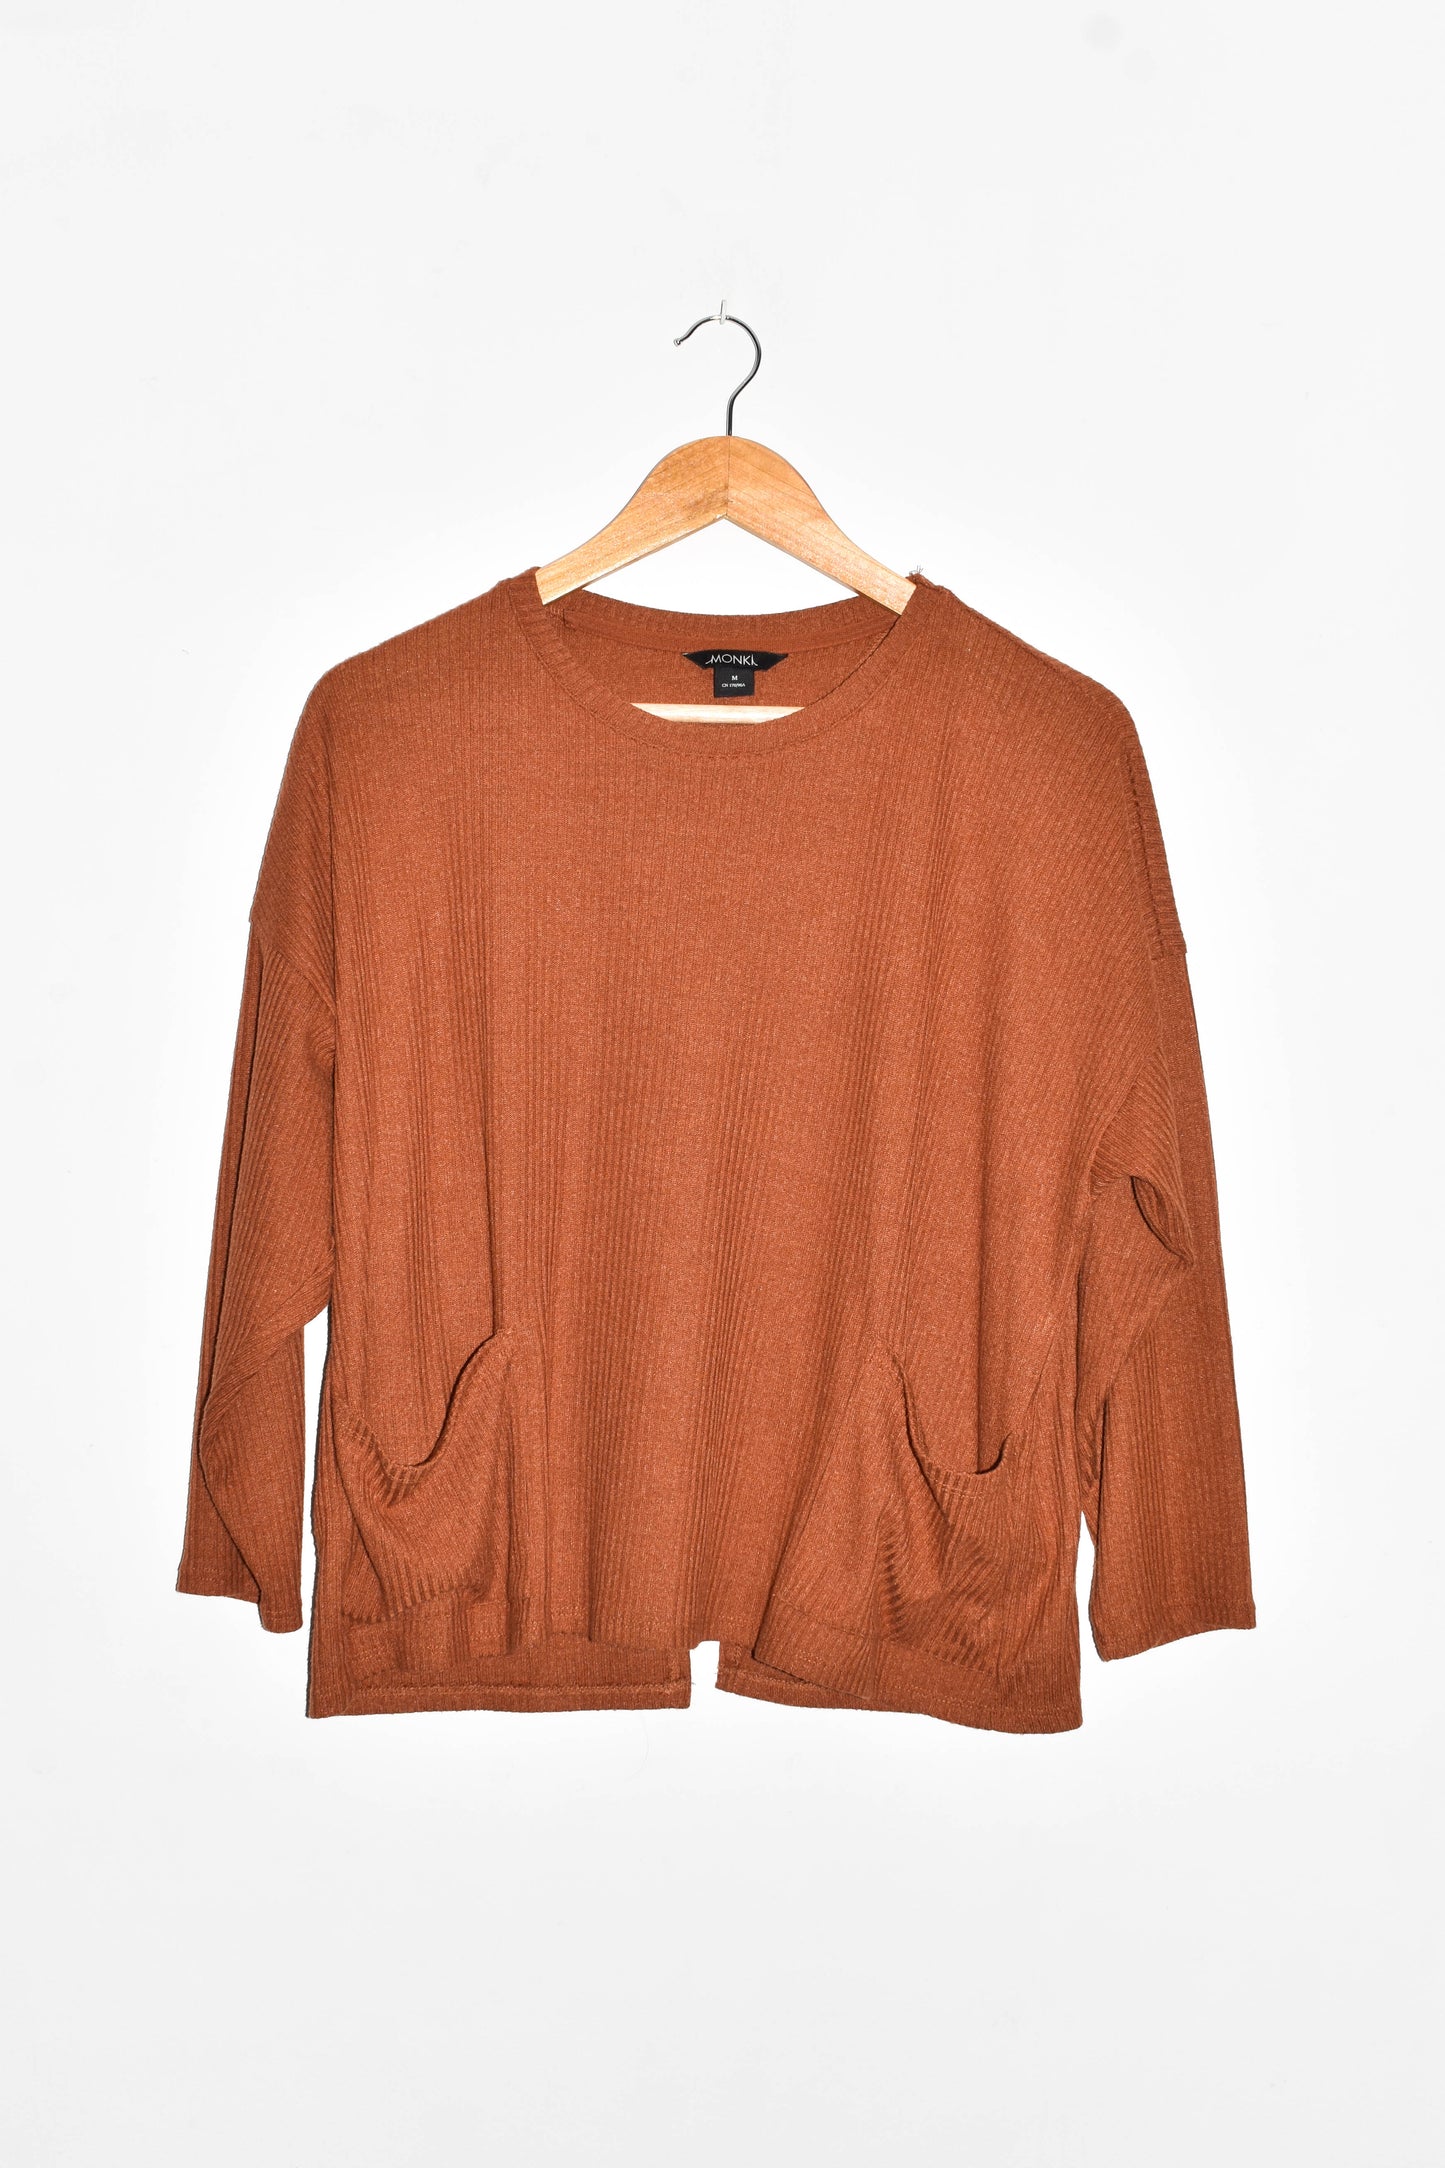 NEW IN! Autumn top